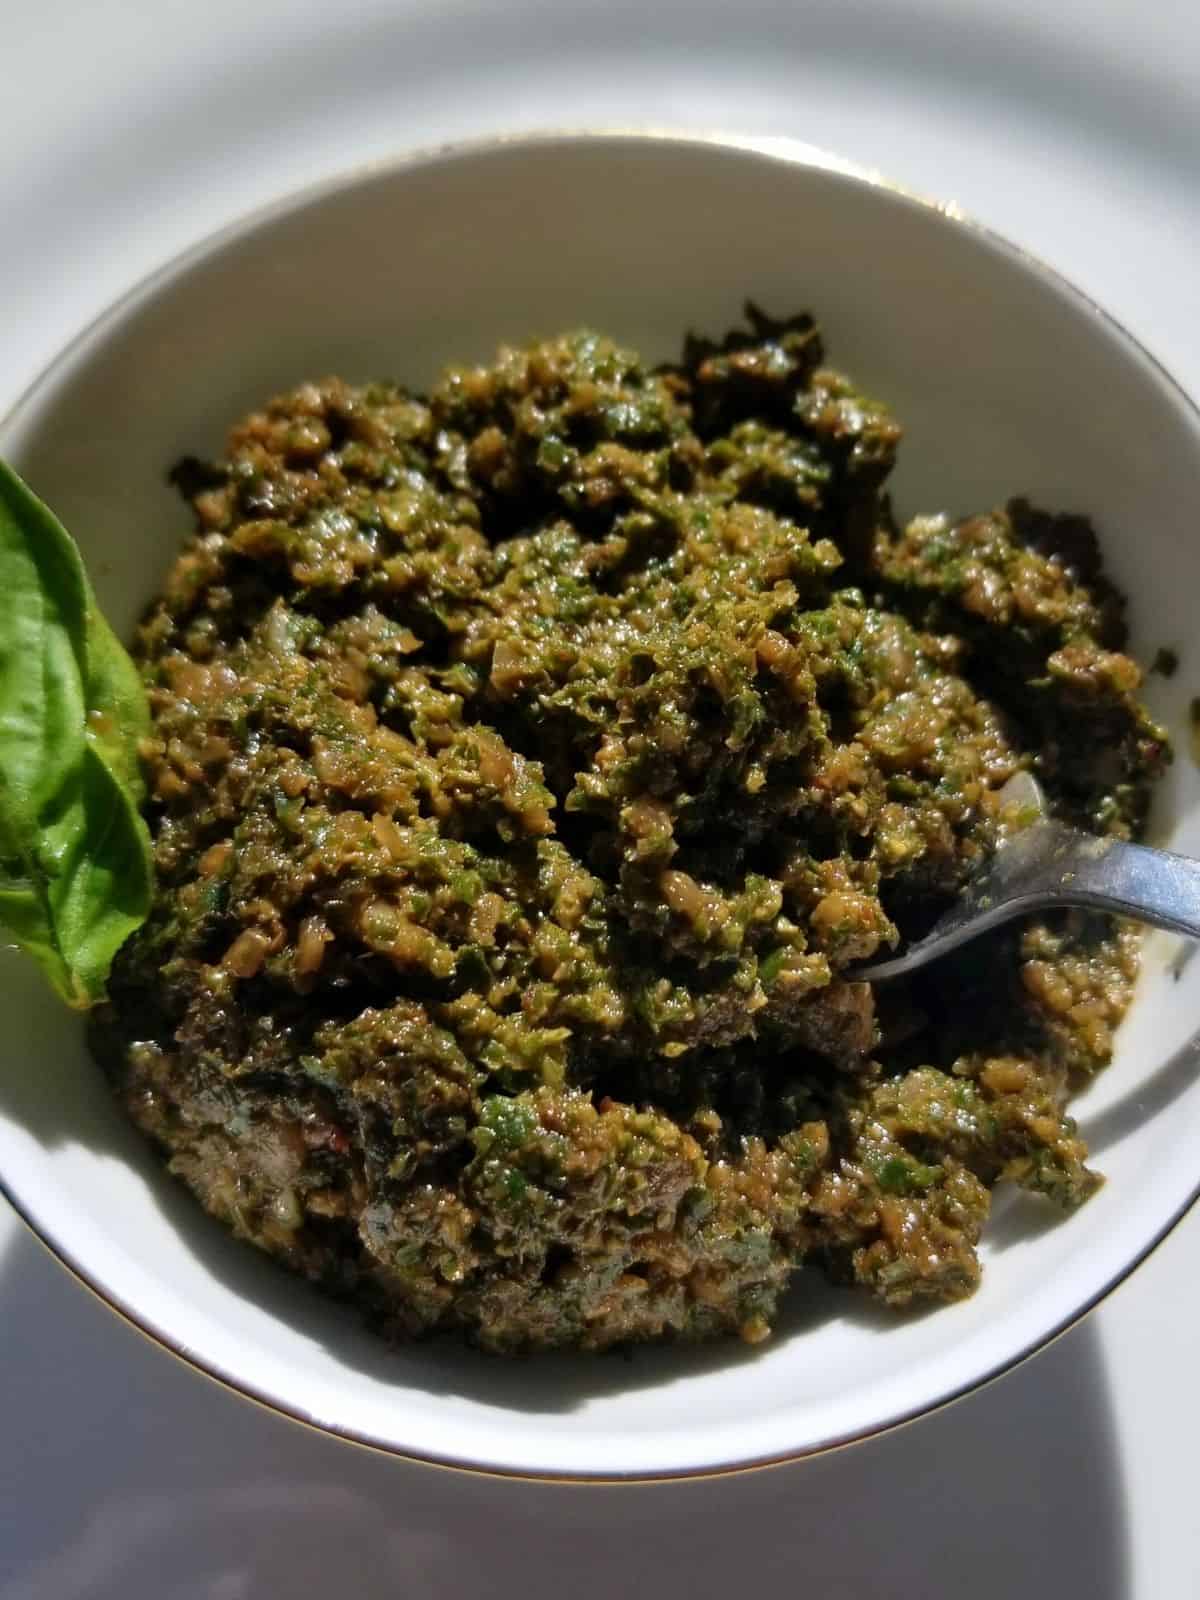 sunflower seed pesto in a glass bowl topped with fresh basil leaf.